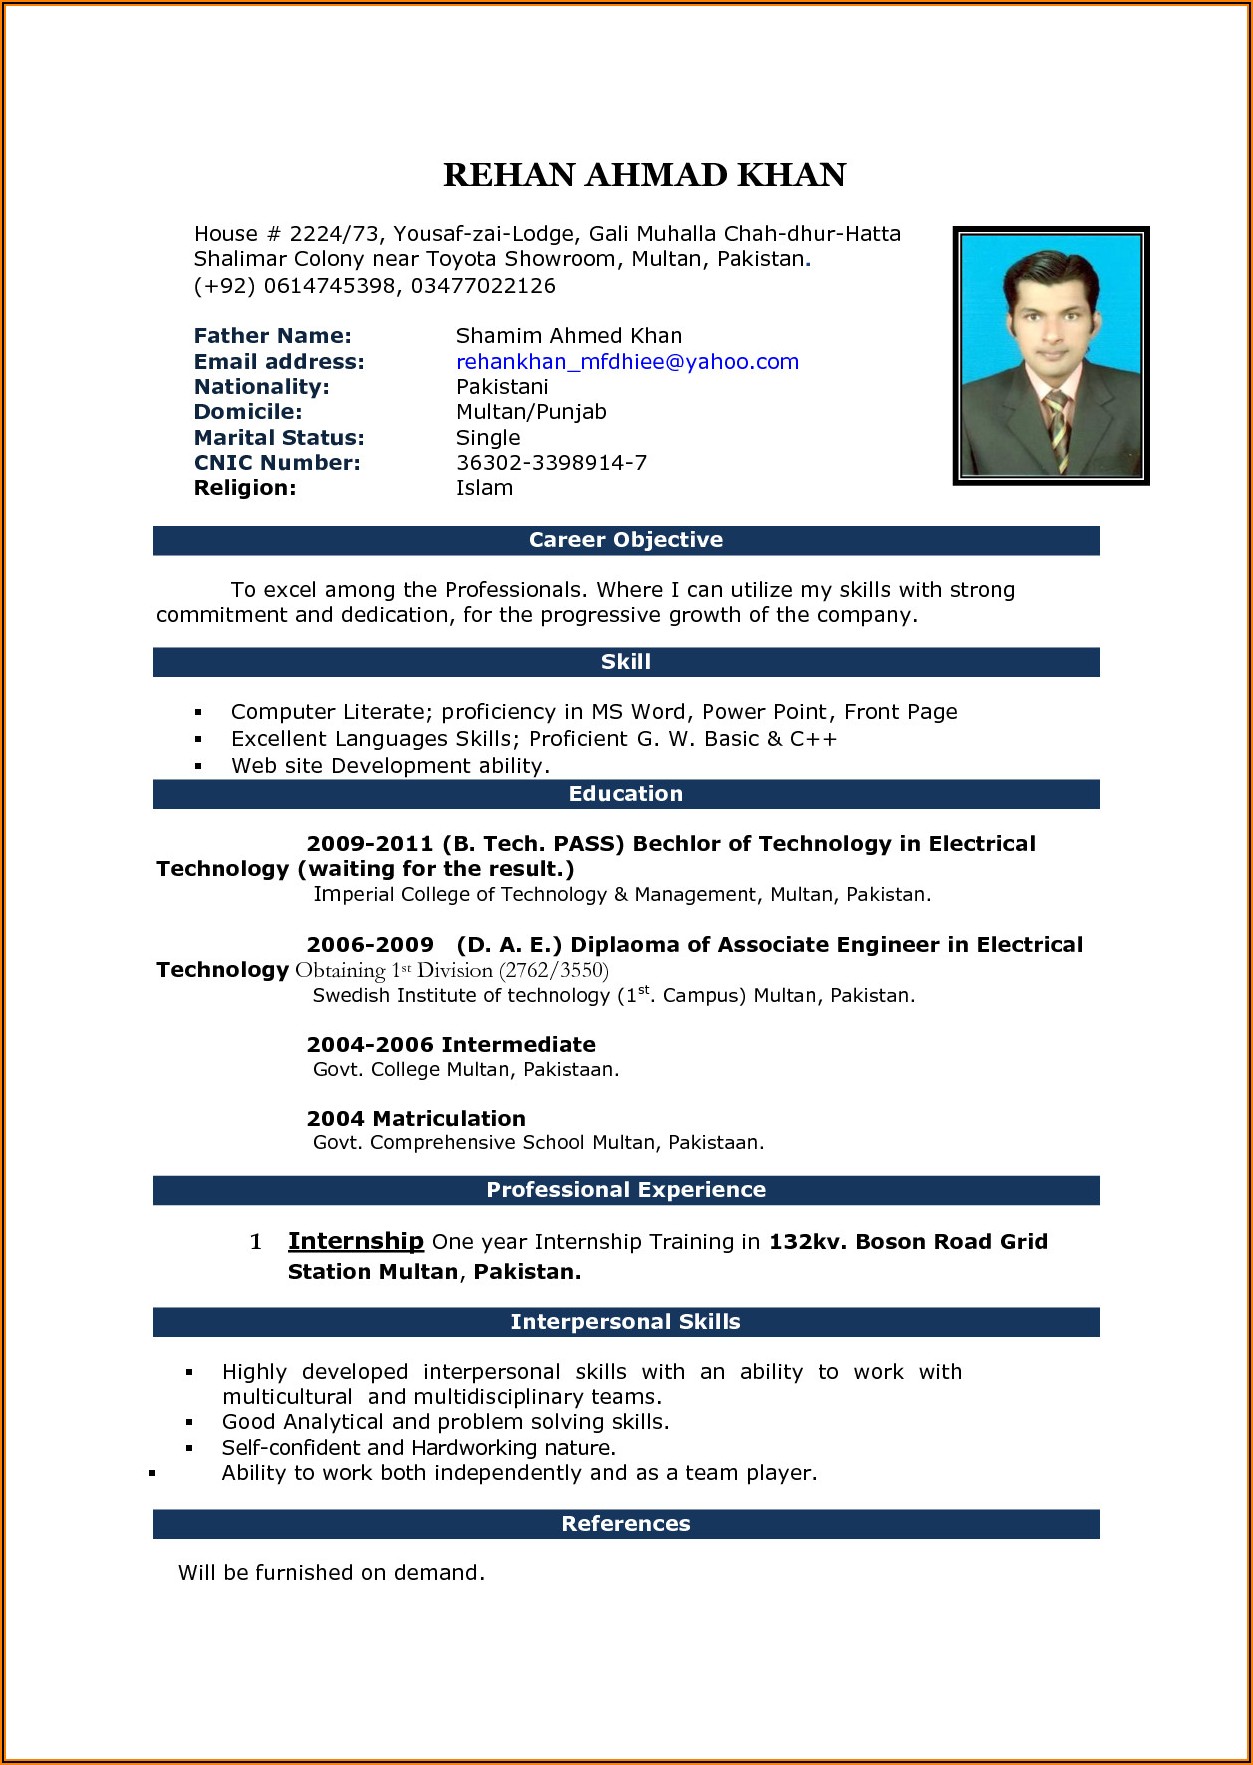 Resume Template For Microsoft Word 2007